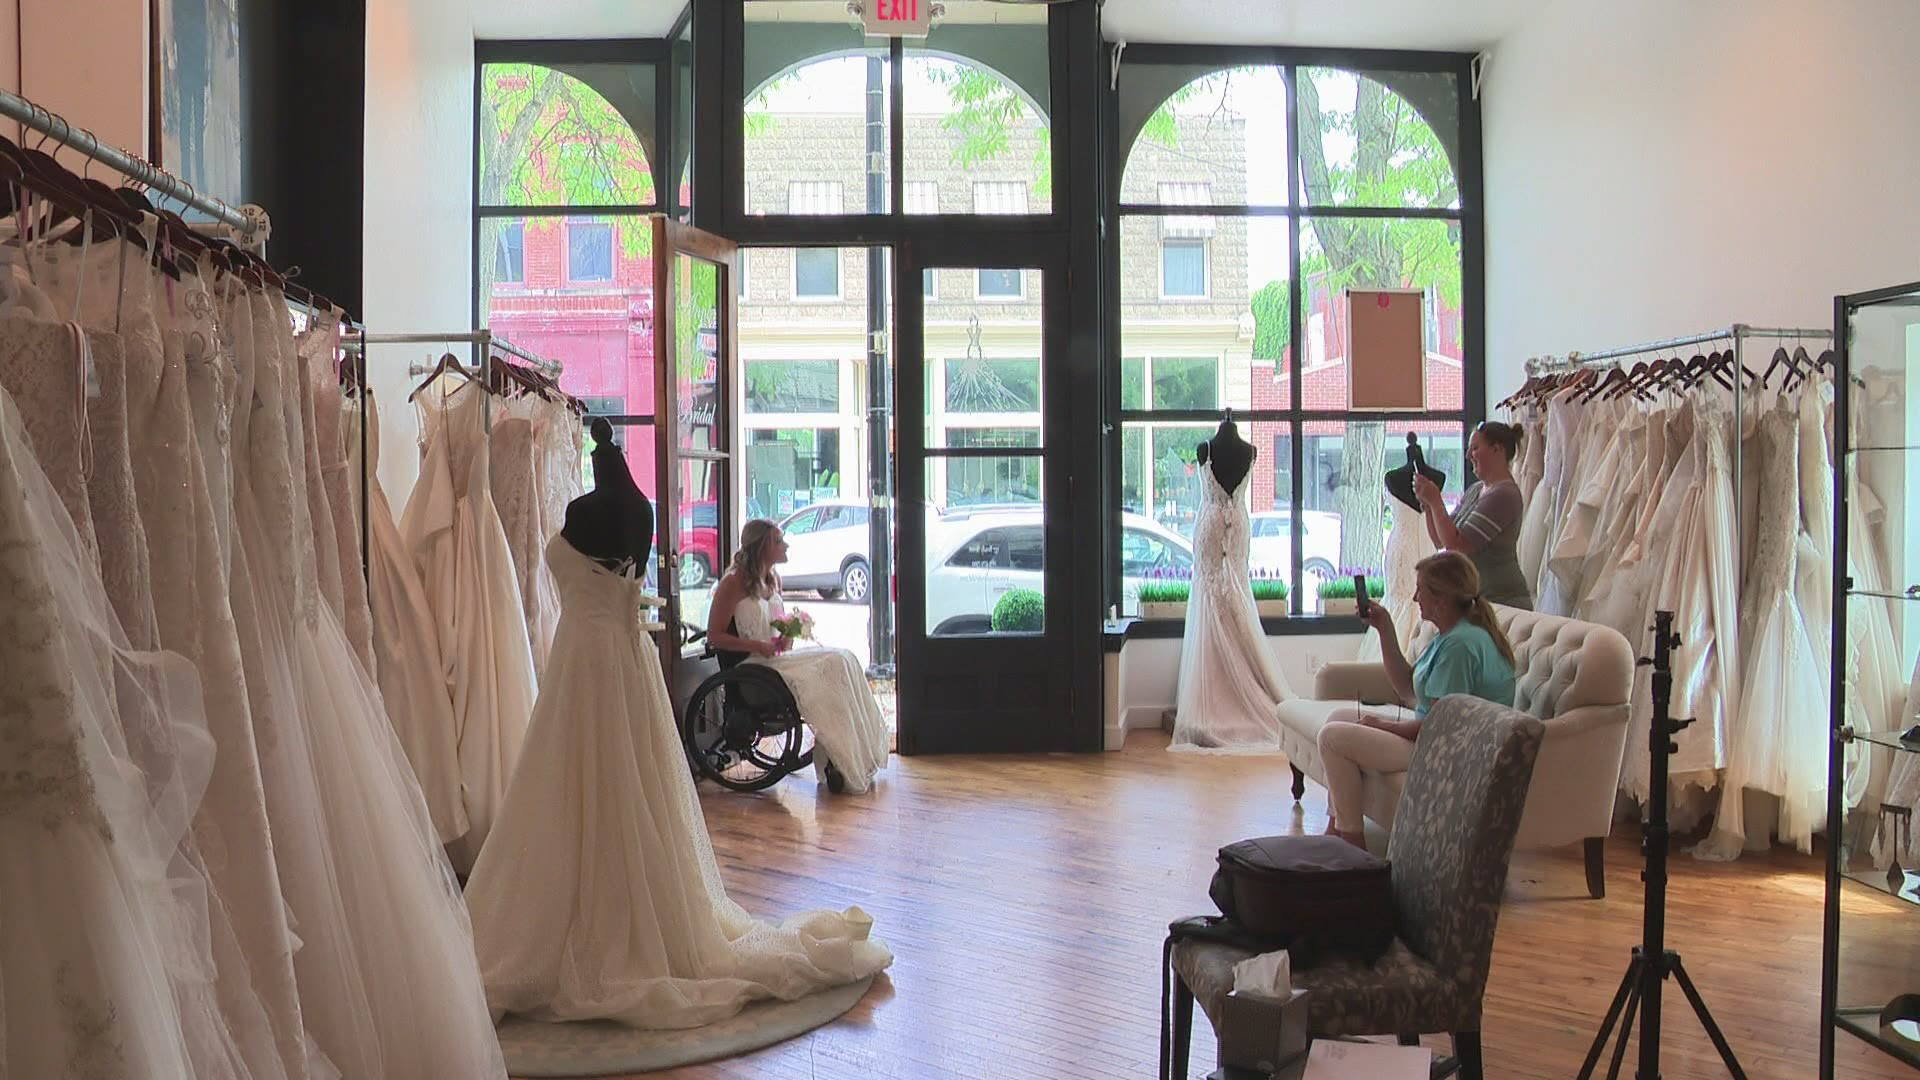 The bridal shop hosted a photoshoot that highlighted models of all different backgrounds and abilities -- including the former Miss Wheelchair Michigan.